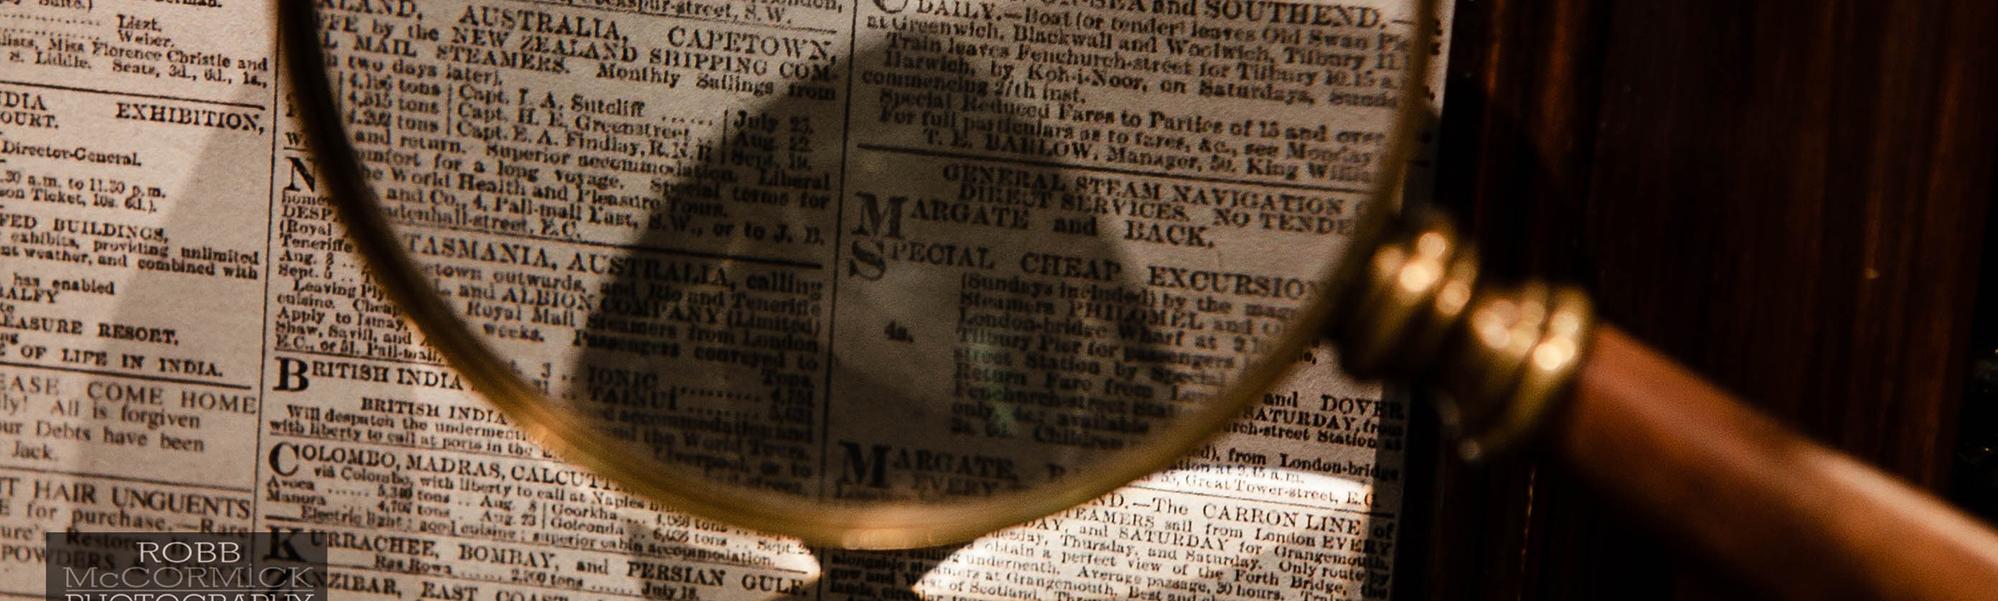 Close up image of magnifying glass with brass rim and a newspaper in the background